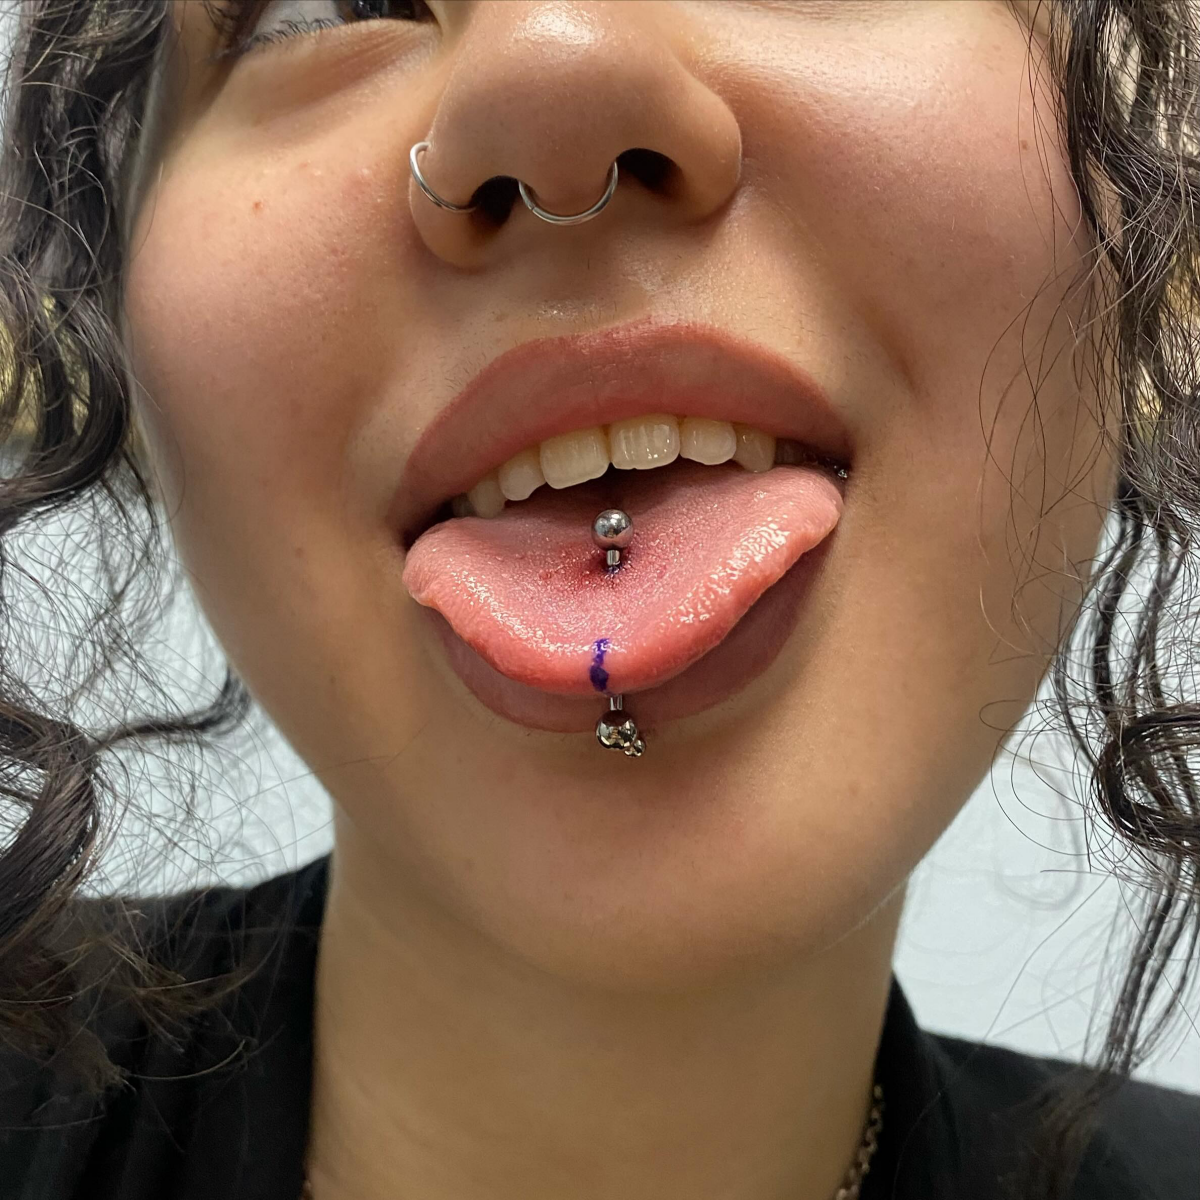 woman with classic tongue piercing